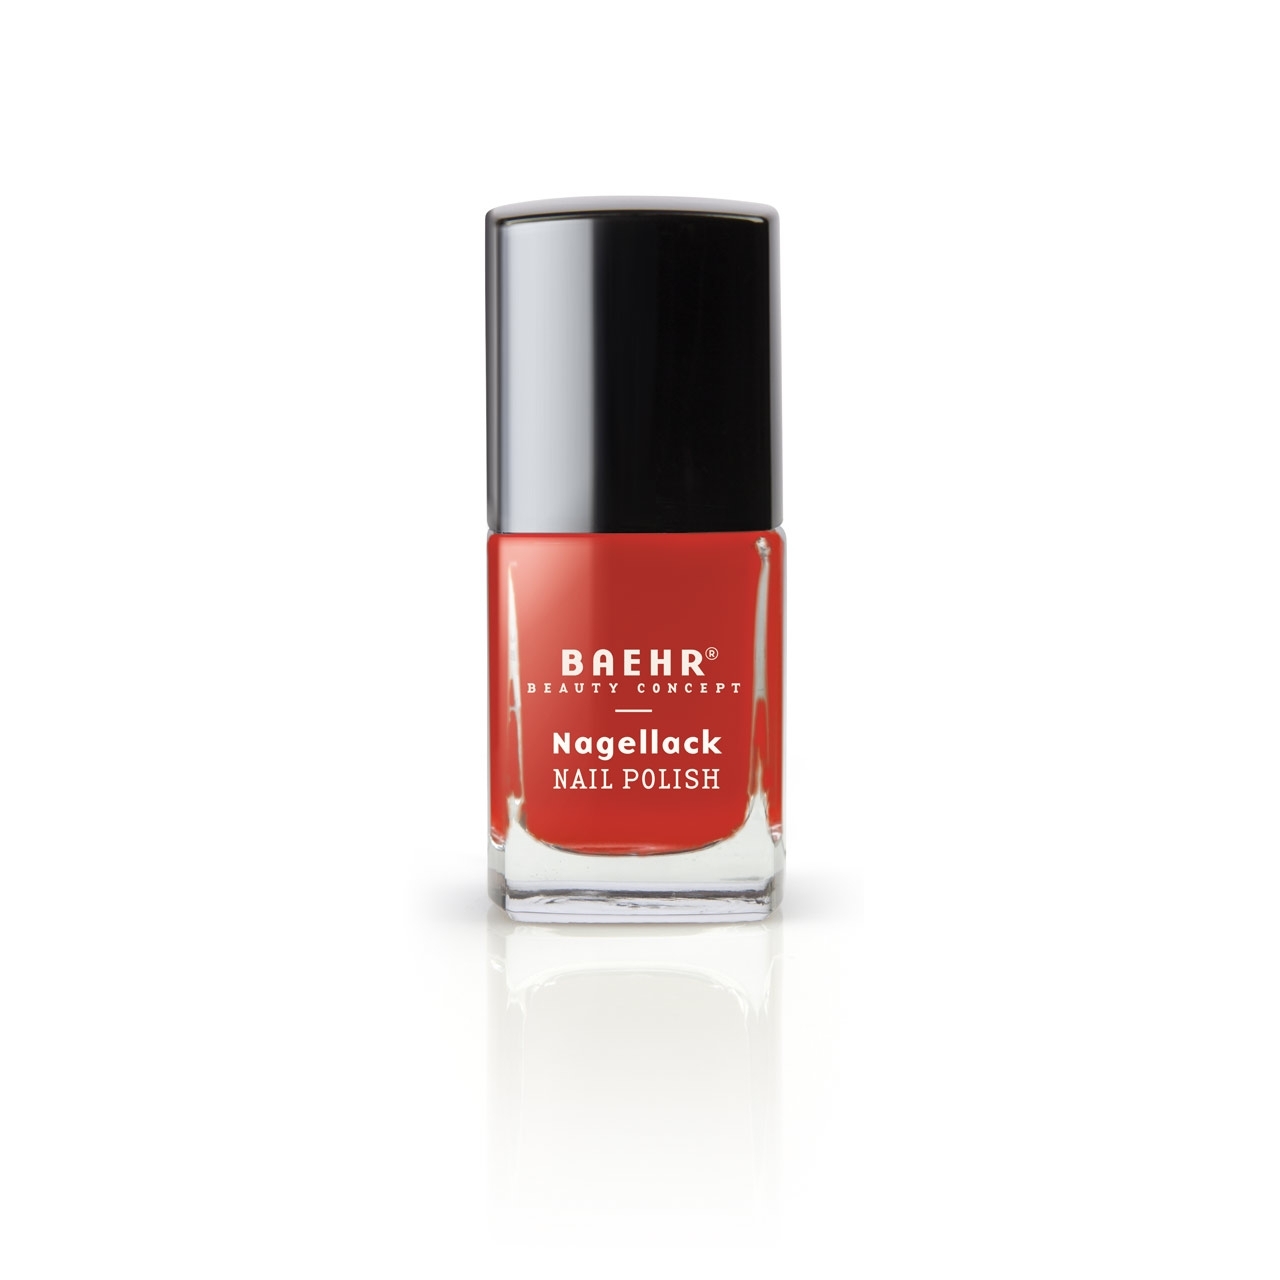 BAEHR BEAUTY CONCEPT - NAILS Nagellack sunglow red 11 ml